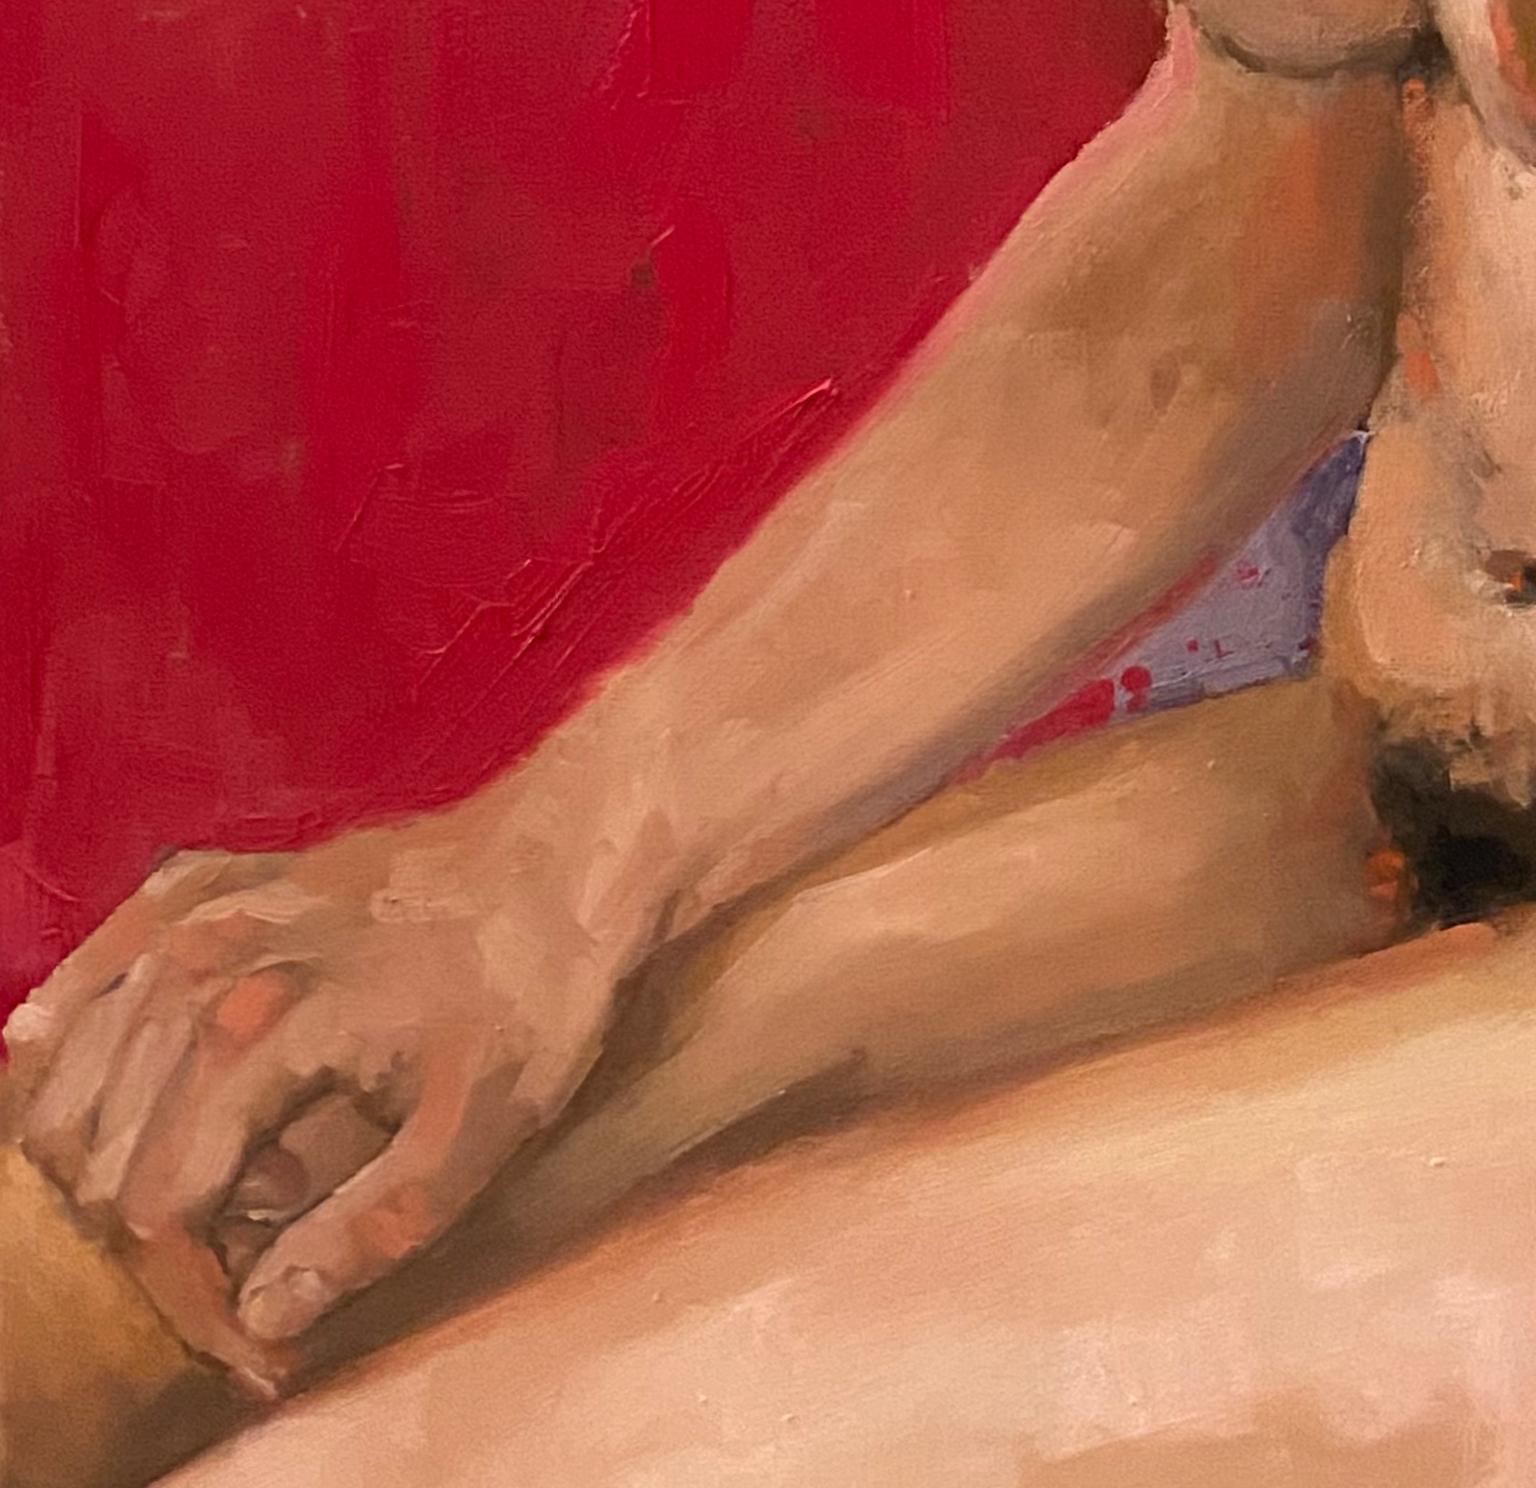 Seated Nude Woman  Figurative  Female   Model  Oil On Canvas By Shana Wilson 2